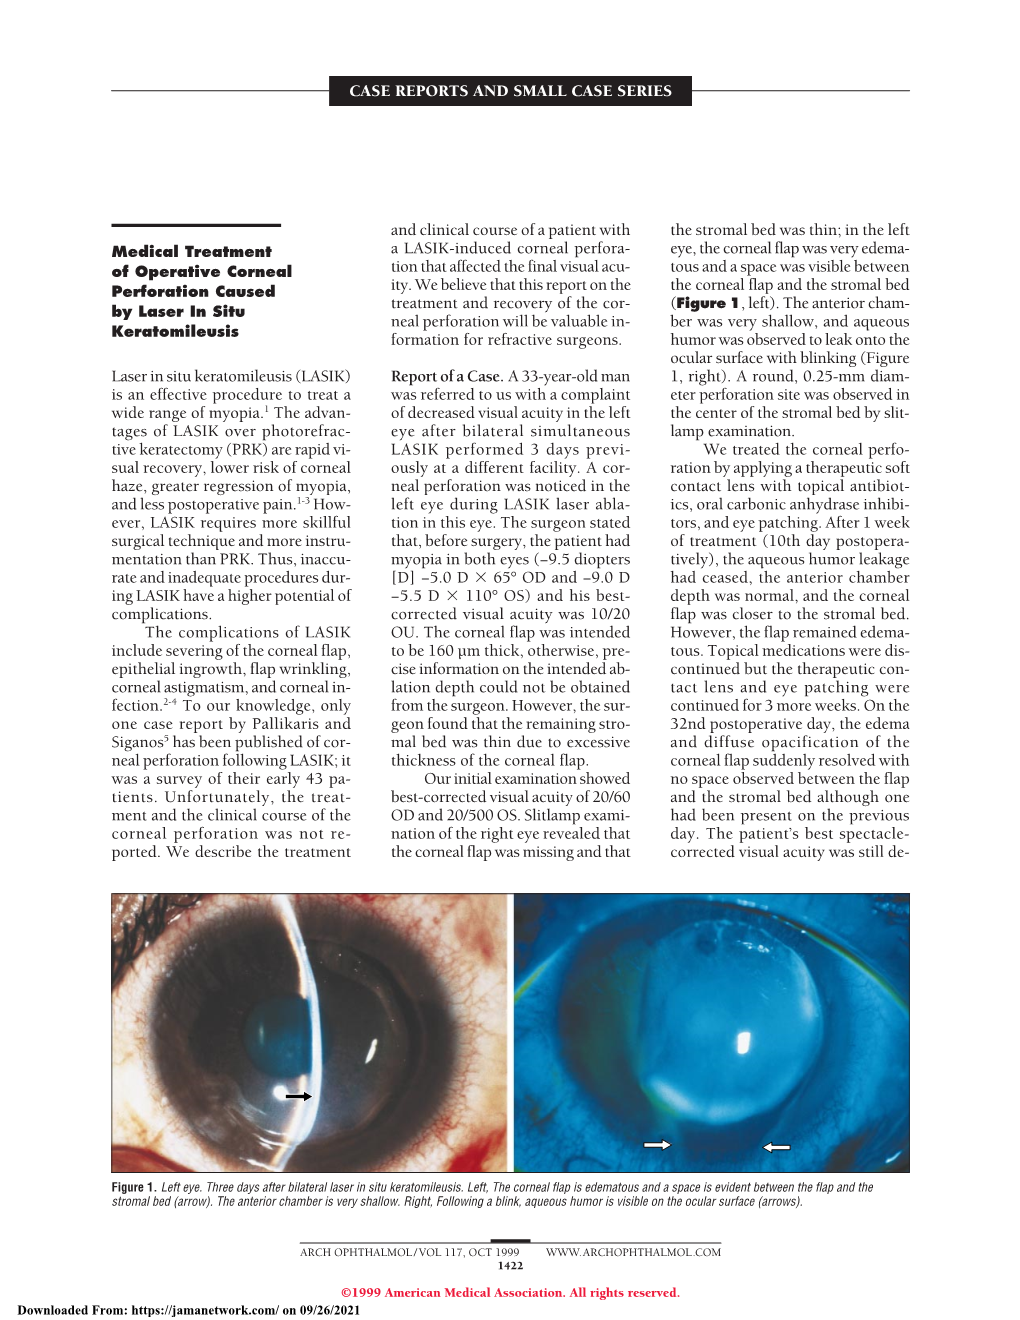 Bilateral Massive Retinal Hemorrhages in a 6-Month-Old Infant